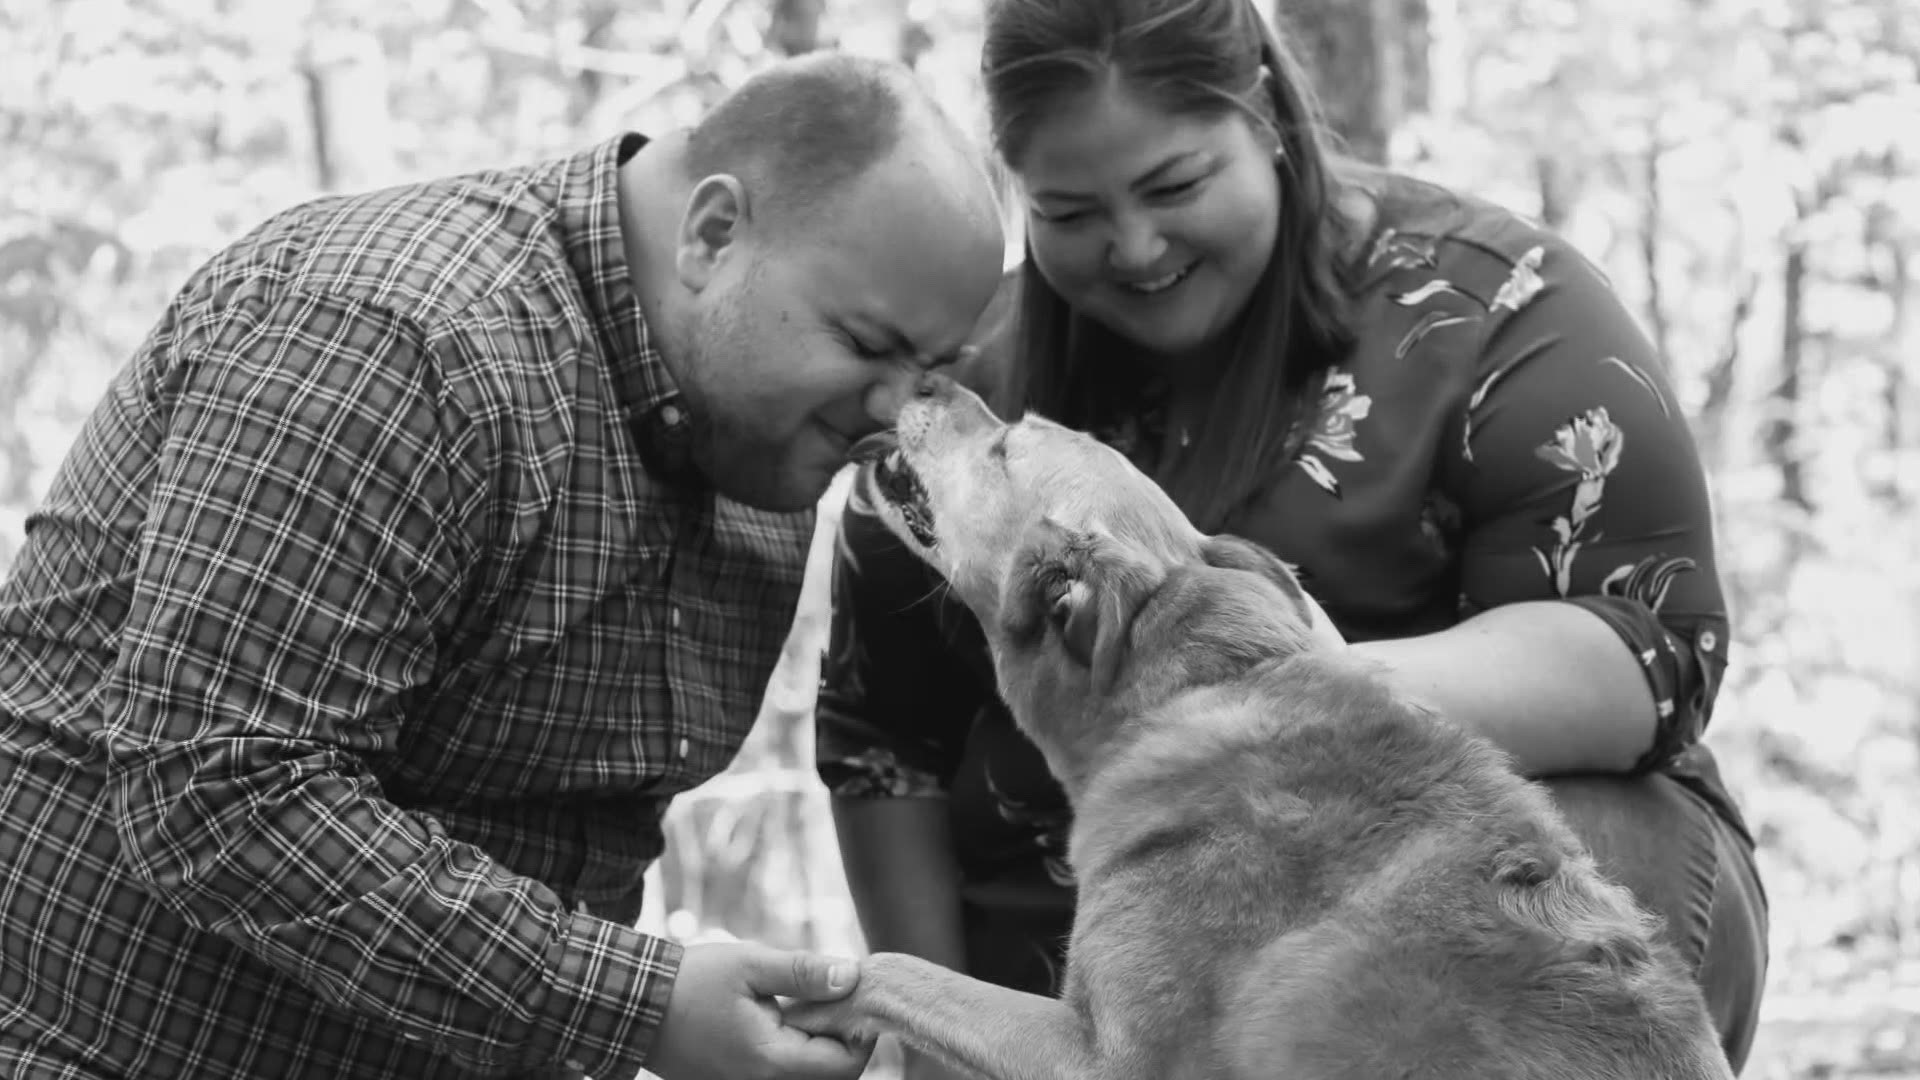 Lauren Kennedy helps to provide pet owners with some happy memories when their dogs are getting close to the end of their lives.